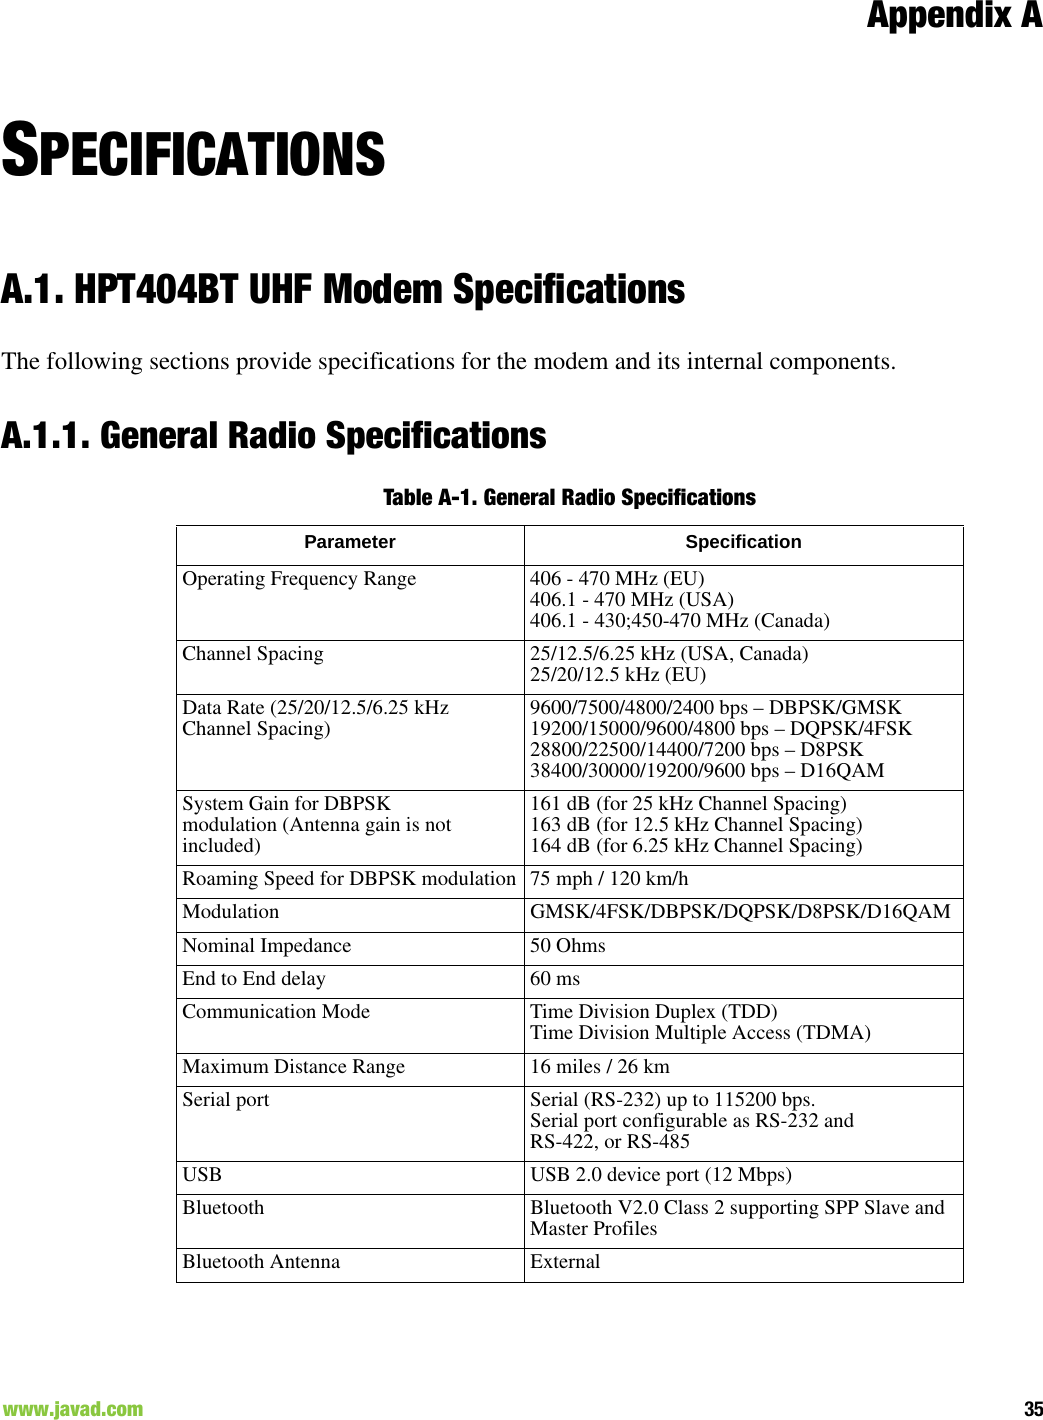 Appendix A35www.javad.com                                                                                                                                              SPECIFICATIONSA.1. HPT404BT UHF Modem SpecificationsThe following sections provide specifications for the modem and its internal components.A.1.1. General Radio SpecificationsTable A-1. General Radio Specifications Parameter SpecificationOperating Frequency Range 406 - 470 MHz (EU)406.1 - 470 MHz (USA)406.1 - 430;450-470 MHz (Canada) Channel Spacing 25/12.5/6.25 kHz (USA, Canada)25/20/12.5 kHz (EU)Data Rate (25/20/12.5/6.25 kHz Channel Spacing) 9600/7500/4800/2400 bps – DBPSK/GMSK19200/15000/9600/4800 bps – DQPSK/4FSK28800/22500/14400/7200 bps – D8PSK38400/30000/19200/9600 bps – D16QAMSystem Gain for DBPSKmodulation (Antenna gain is notincluded)161 dB (for 25 kHz Channel Spacing)163 dB (for 12.5 kHz Channel Spacing)164 dB (for 6.25 kHz Channel Spacing)Roaming Speed for DBPSK modulation 75 mph / 120 km/hModulation GMSK/4FSK/DBPSK/DQPSK/D8PSK/D16QAM Nominal Impedance 50 OhmsEnd to End delay 60 msCommunication Mode Time Division Duplex (TDD)Time Division Multiple Access (TDMA)Maximum Distance Range 16 miles / 26 kmSerial port Serial (RS-232) up to 115200 bps.Serial port configurable as RS-232 and RS-422, or RS-485USB USB 2.0 device port (12 Mbps)Bluetooth Bluetooth V2.0 Class 2 supporting SPP Slave and Master ProfilesBluetooth Antenna External